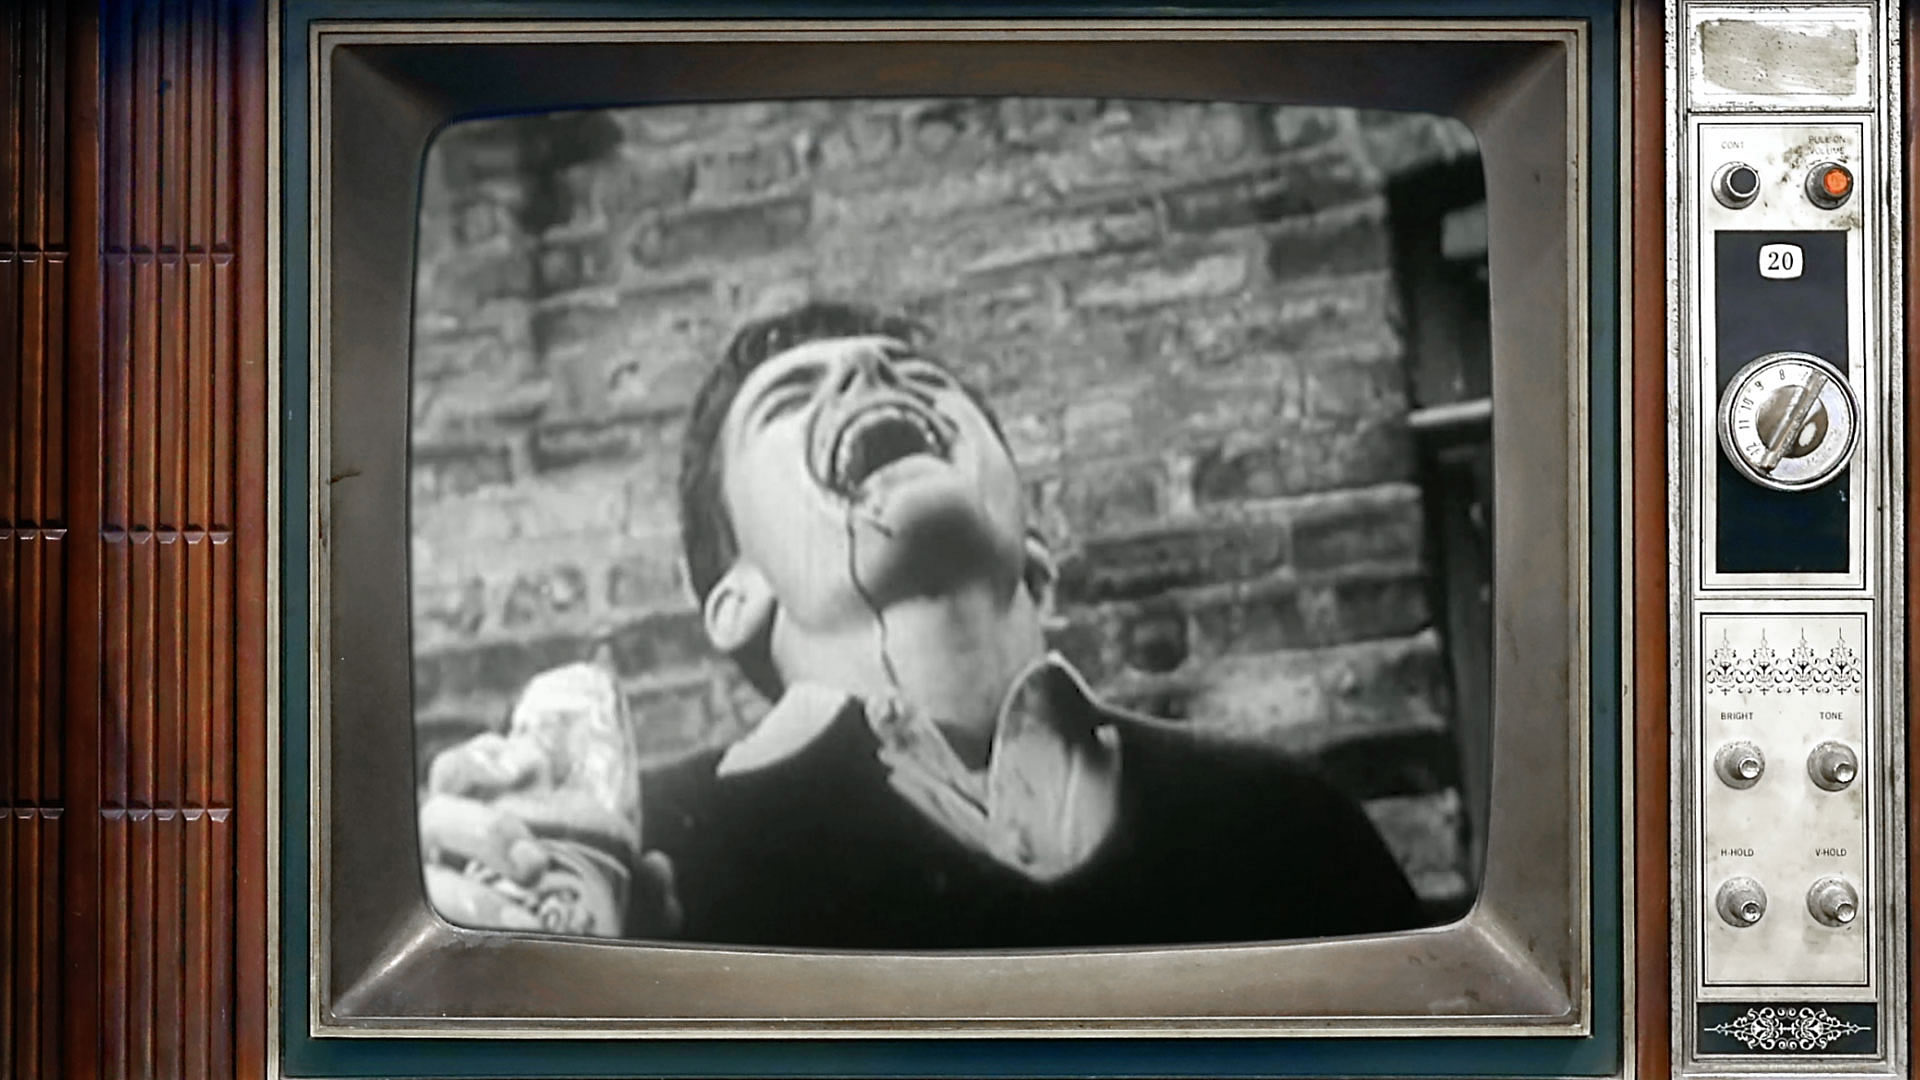 An old-school television playing a clip from the movie: Reefer Madness